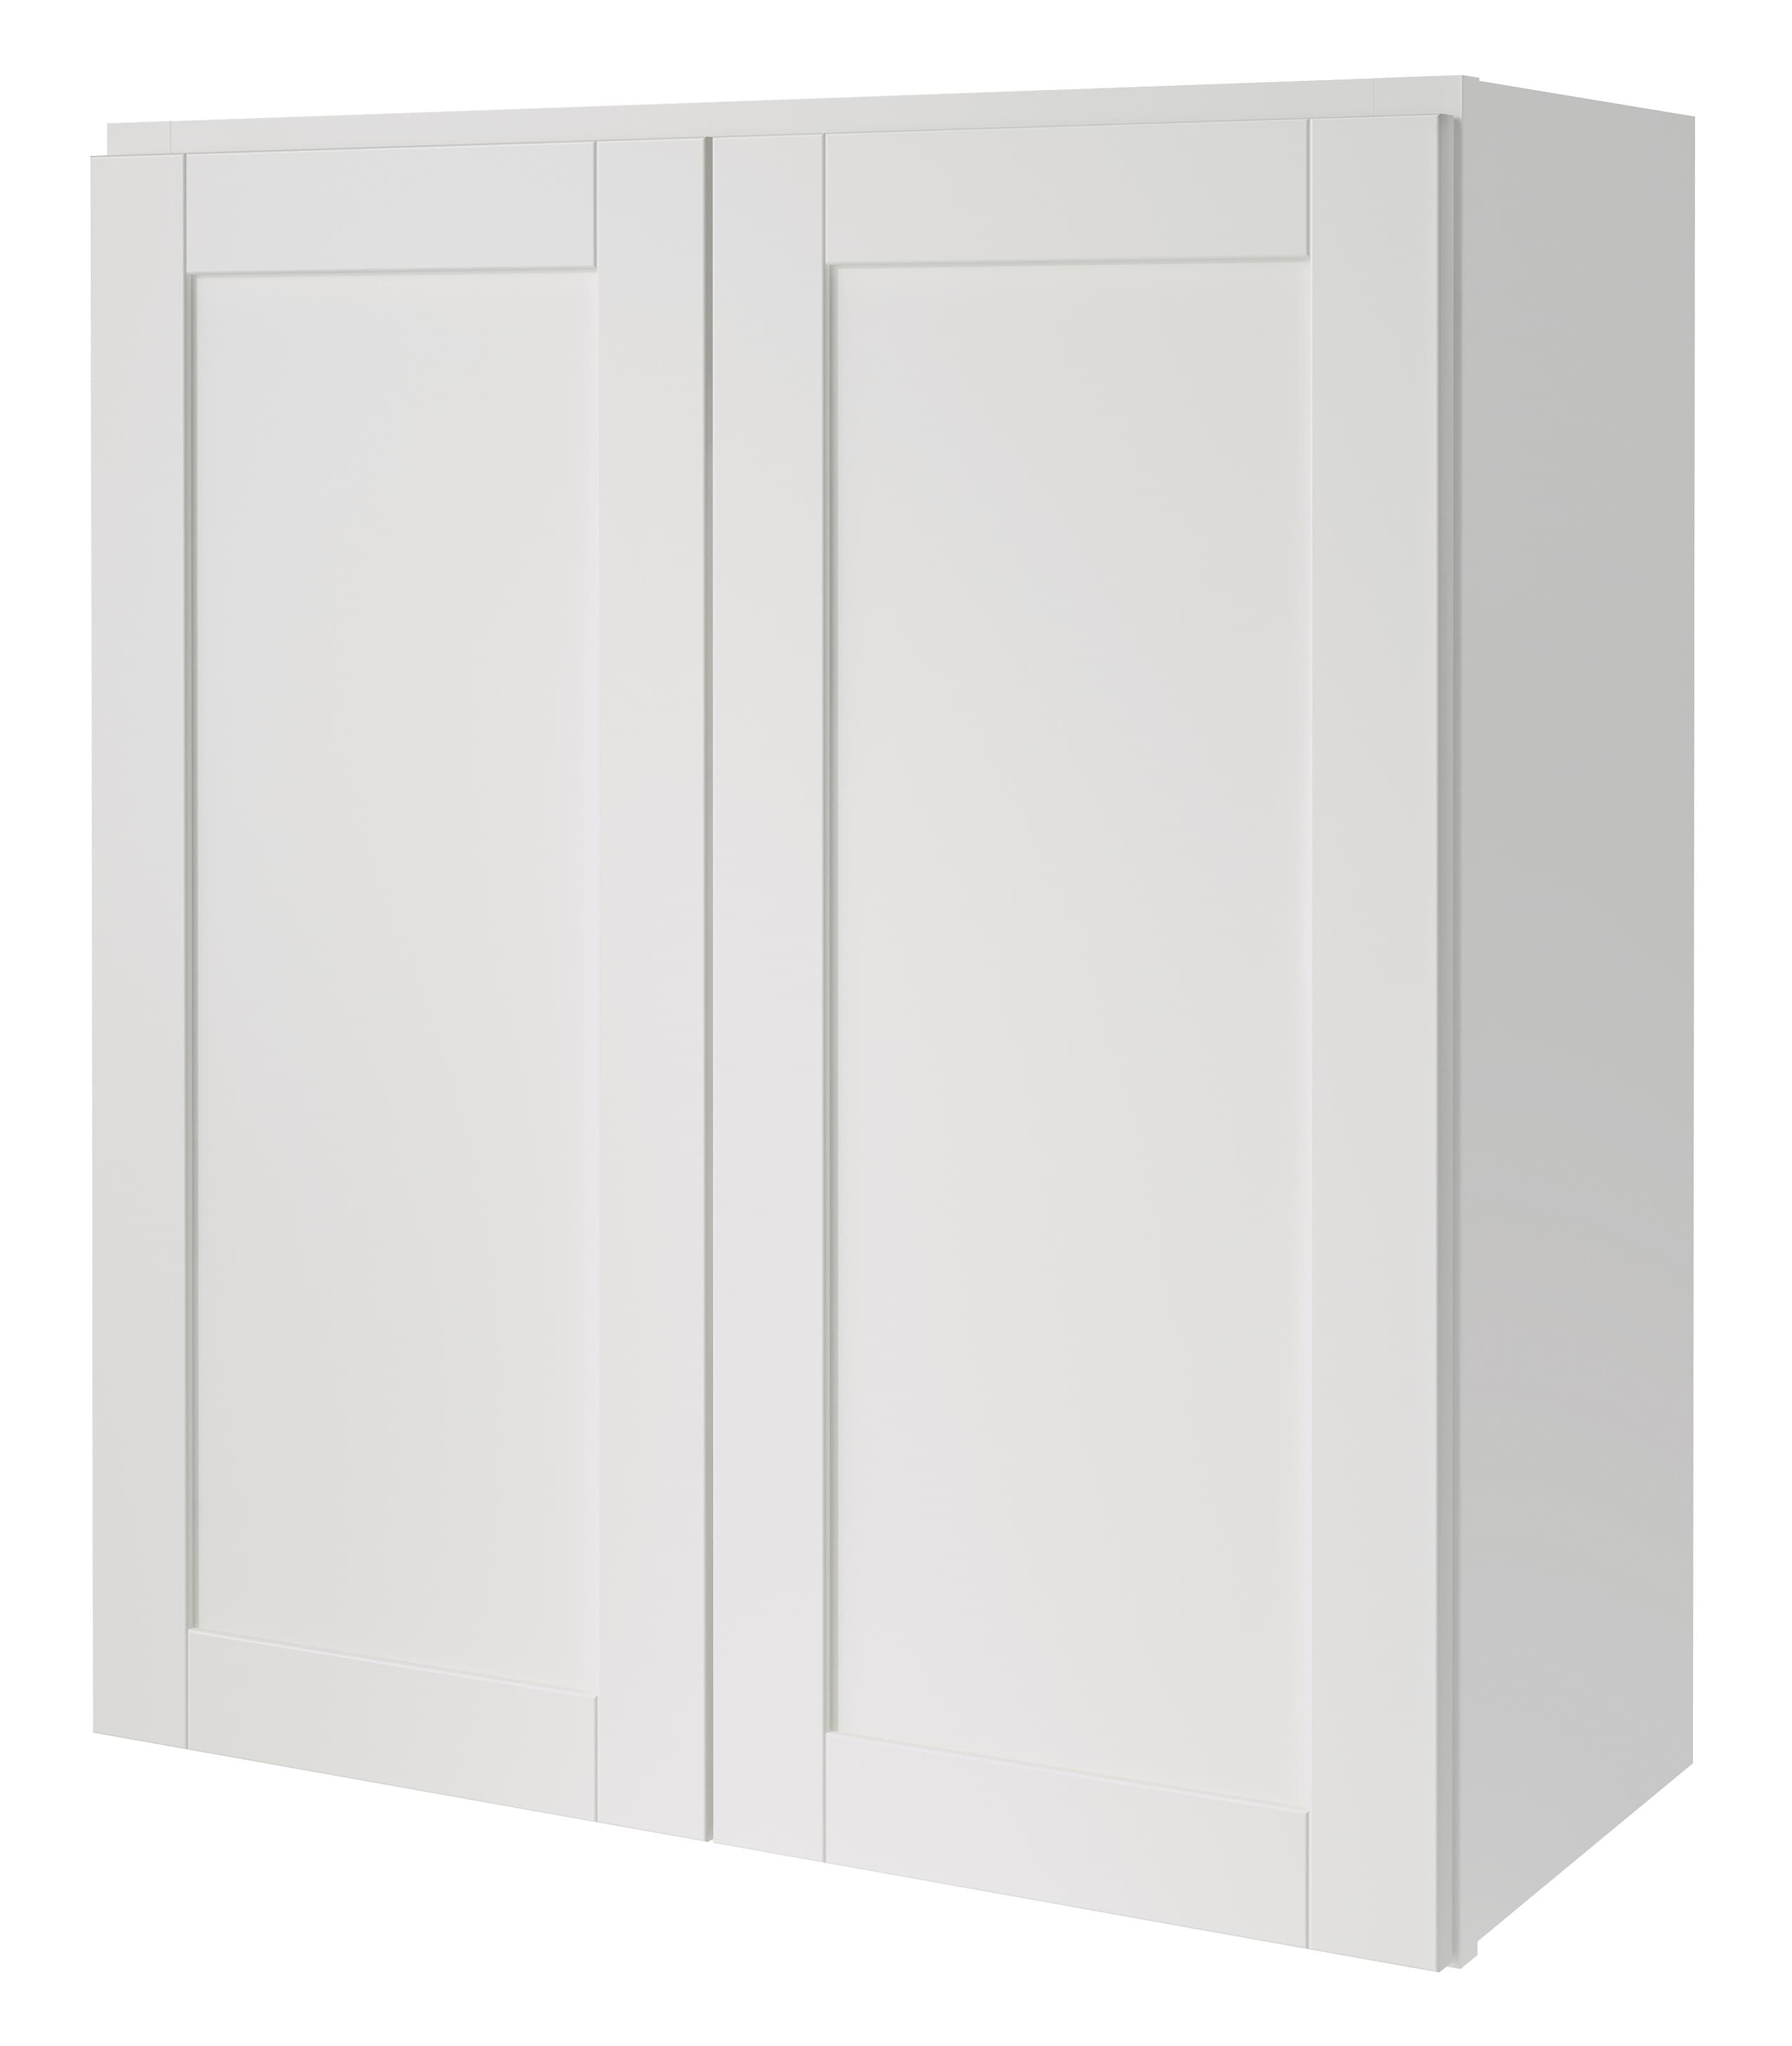 Diamond NOW Arcadia 27-in W x 30-in H x 12-in D White Door Wall Fully ...